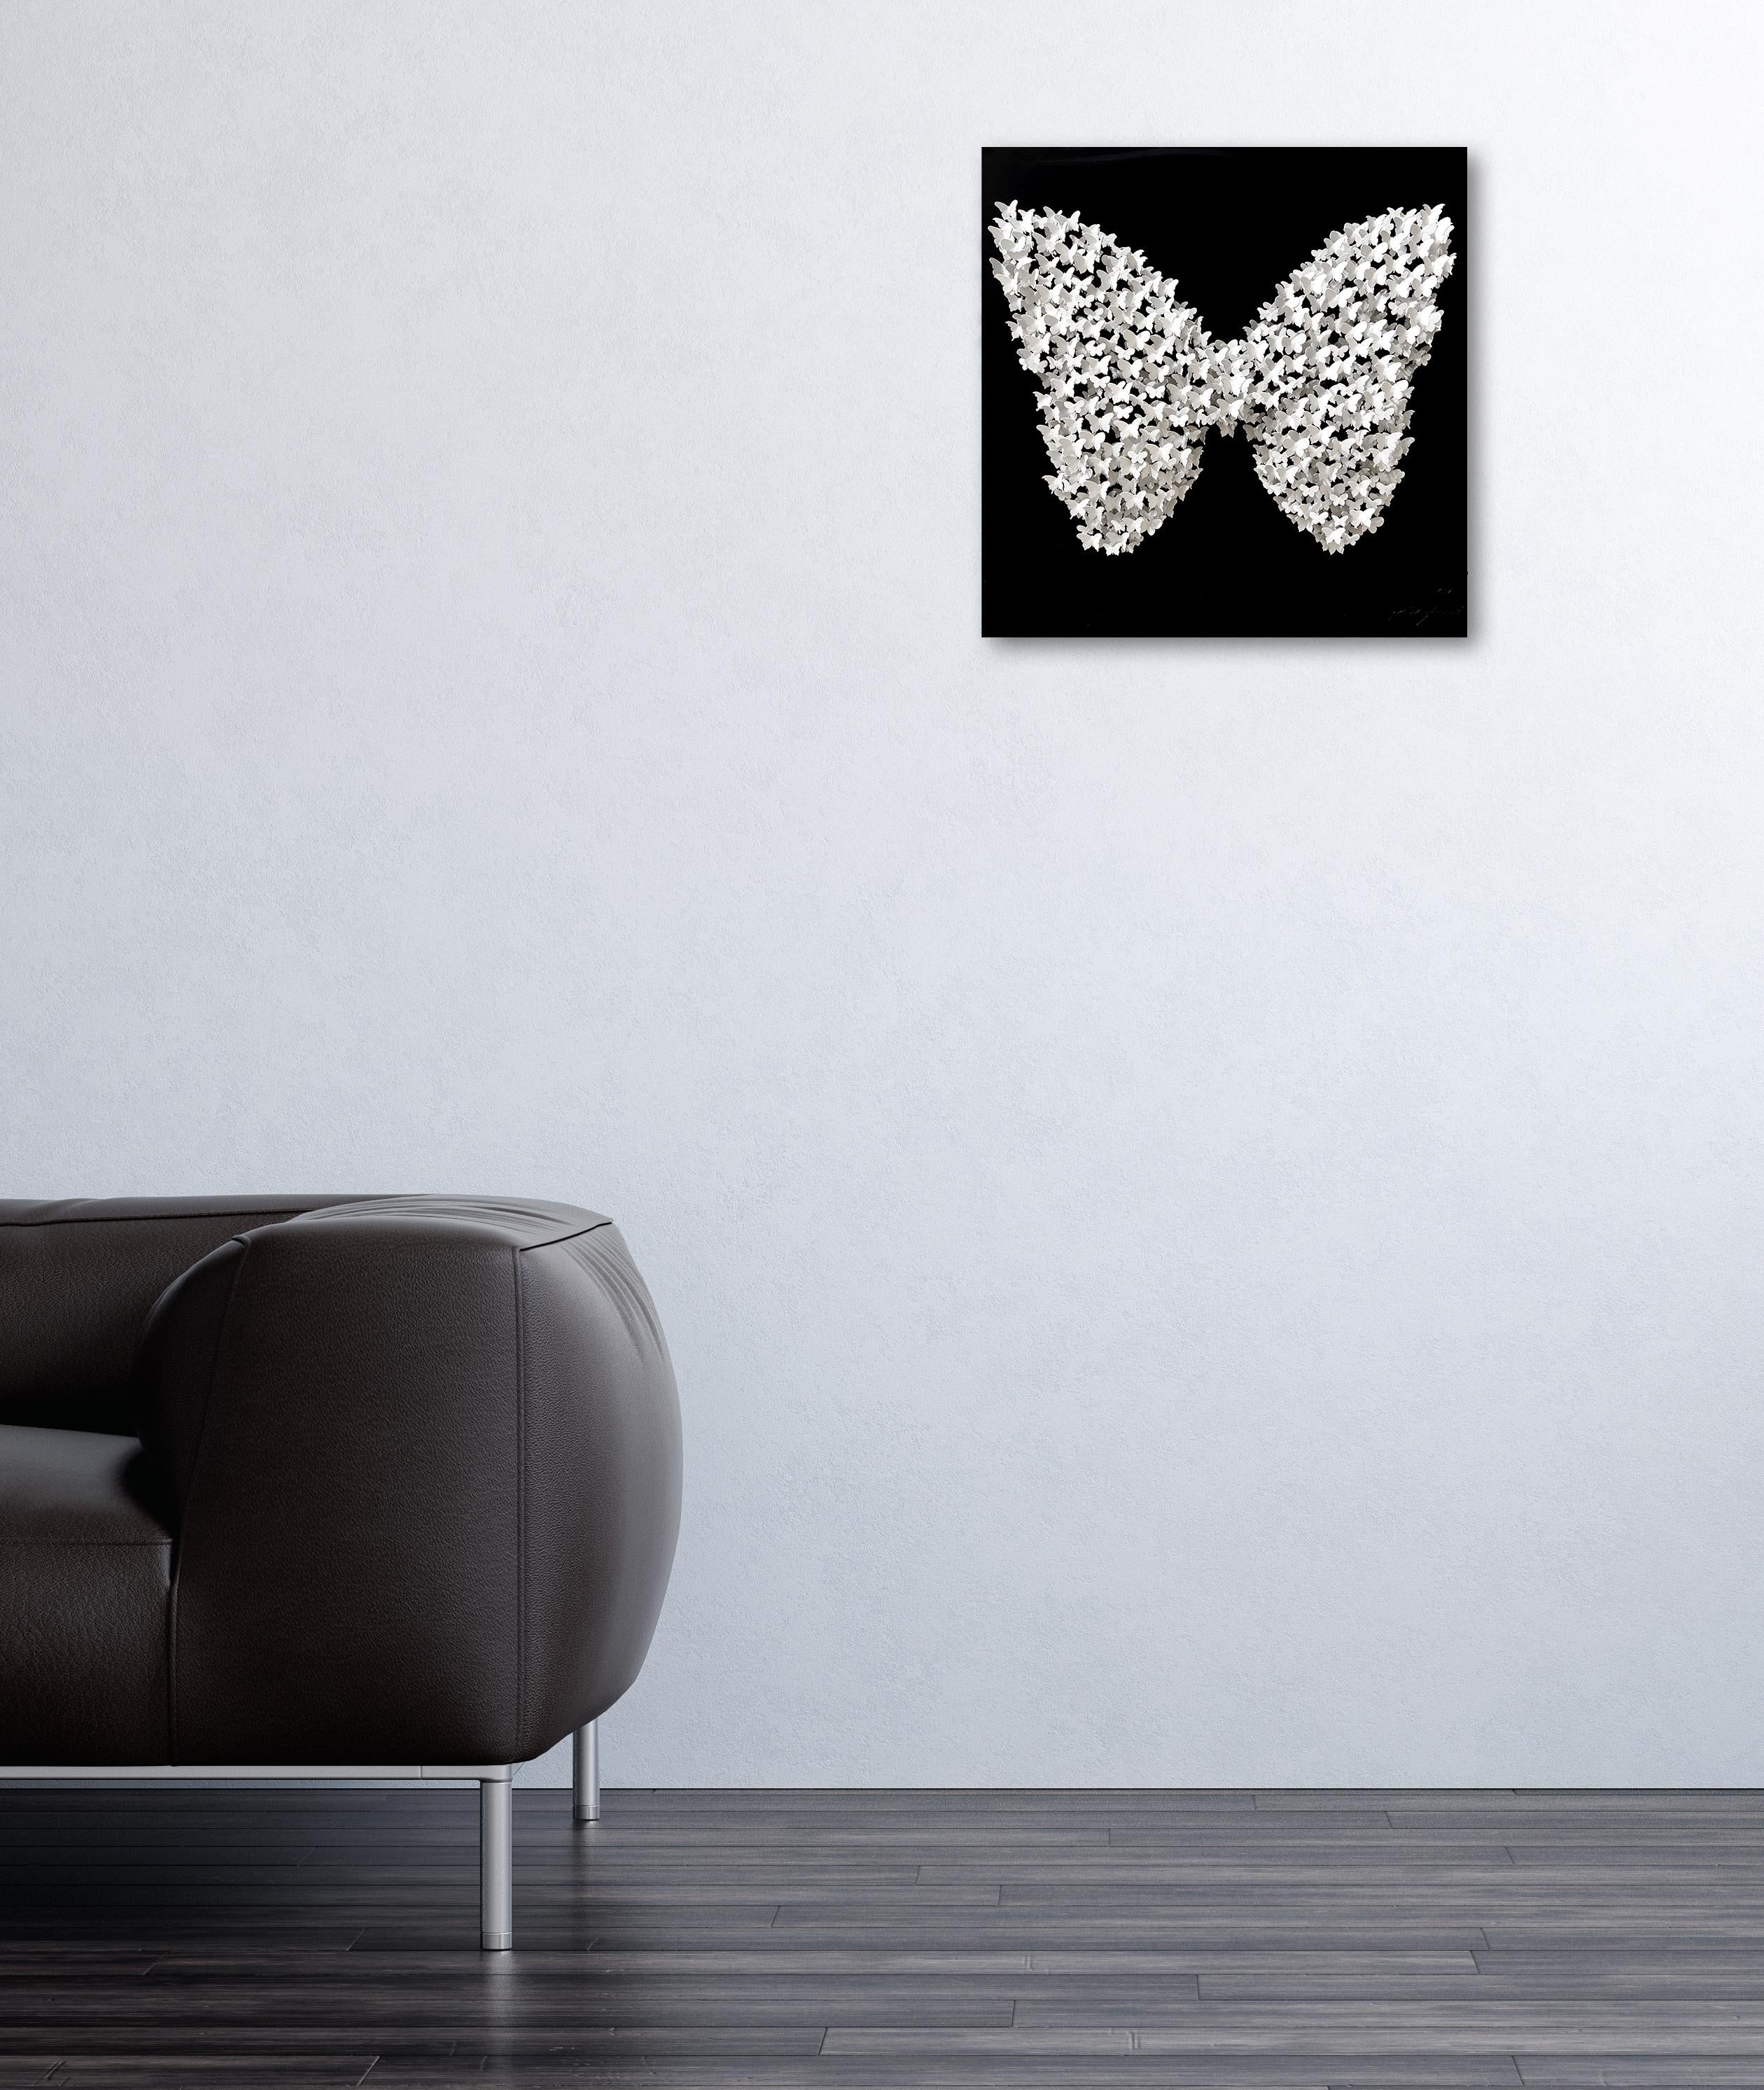 ''Circle of Life (Butterfly) - Black/White'' is a unique mix medium hand painted metal wall sculpture on wood panel by Joel Amit. The artwork comes with a certificate of authenticity and artist's book. This piece is signed and comes ready hang.